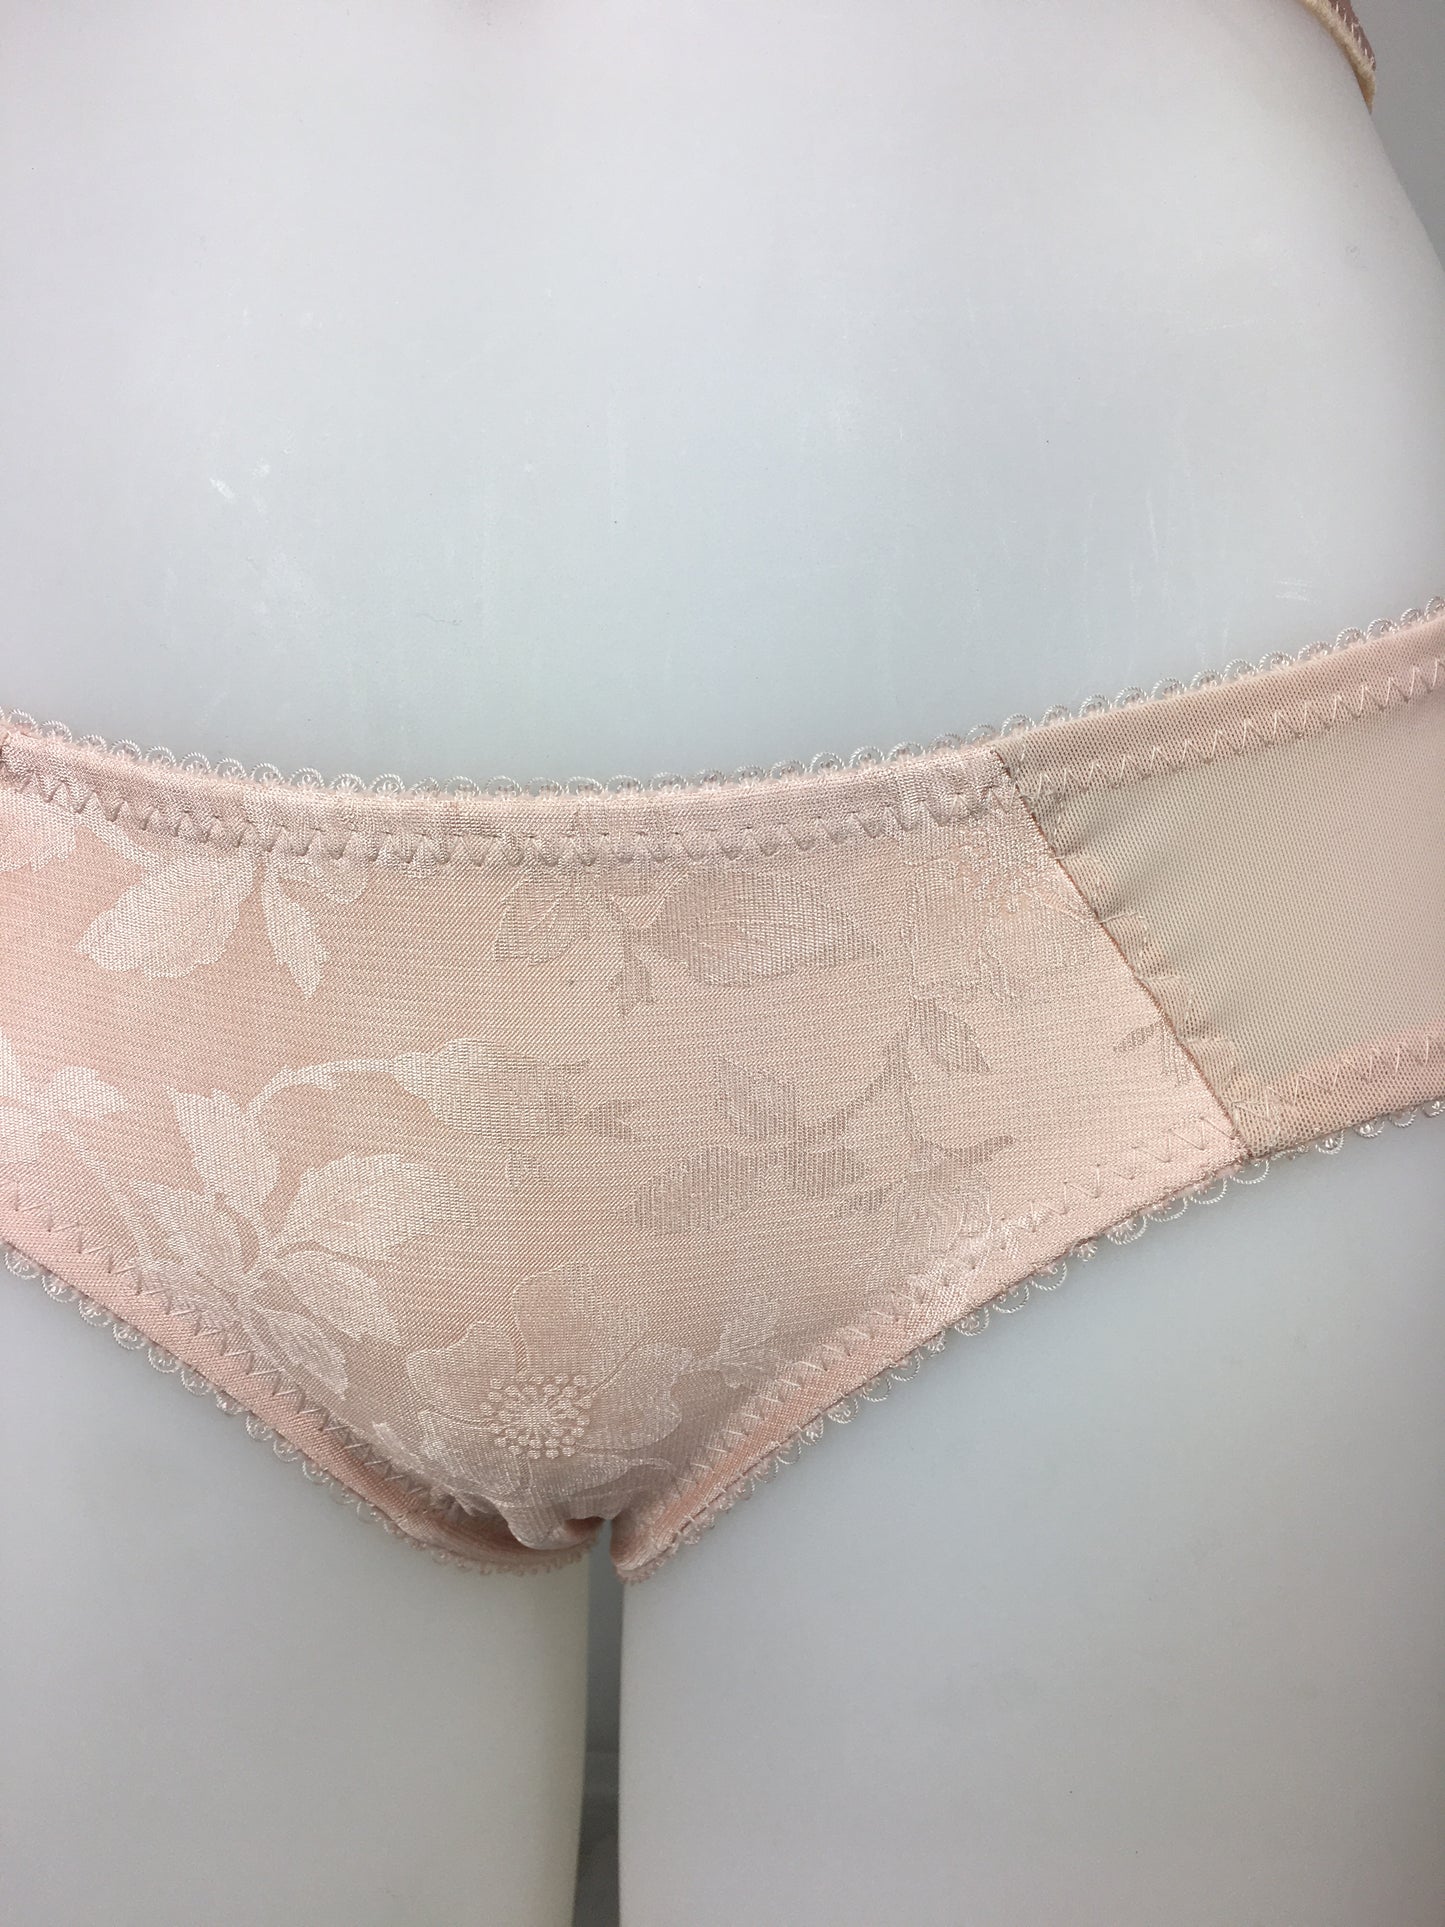 Our most authentic looking vintage inspired lingerie yet. Perfect peachy satin pantie knicker to compliment the other faux vintage lingerie in the clematic range, including longline faux vintage 1950s bra, vintage inspired longline girdle, high waisted pantie girdle and size strap suspender belt